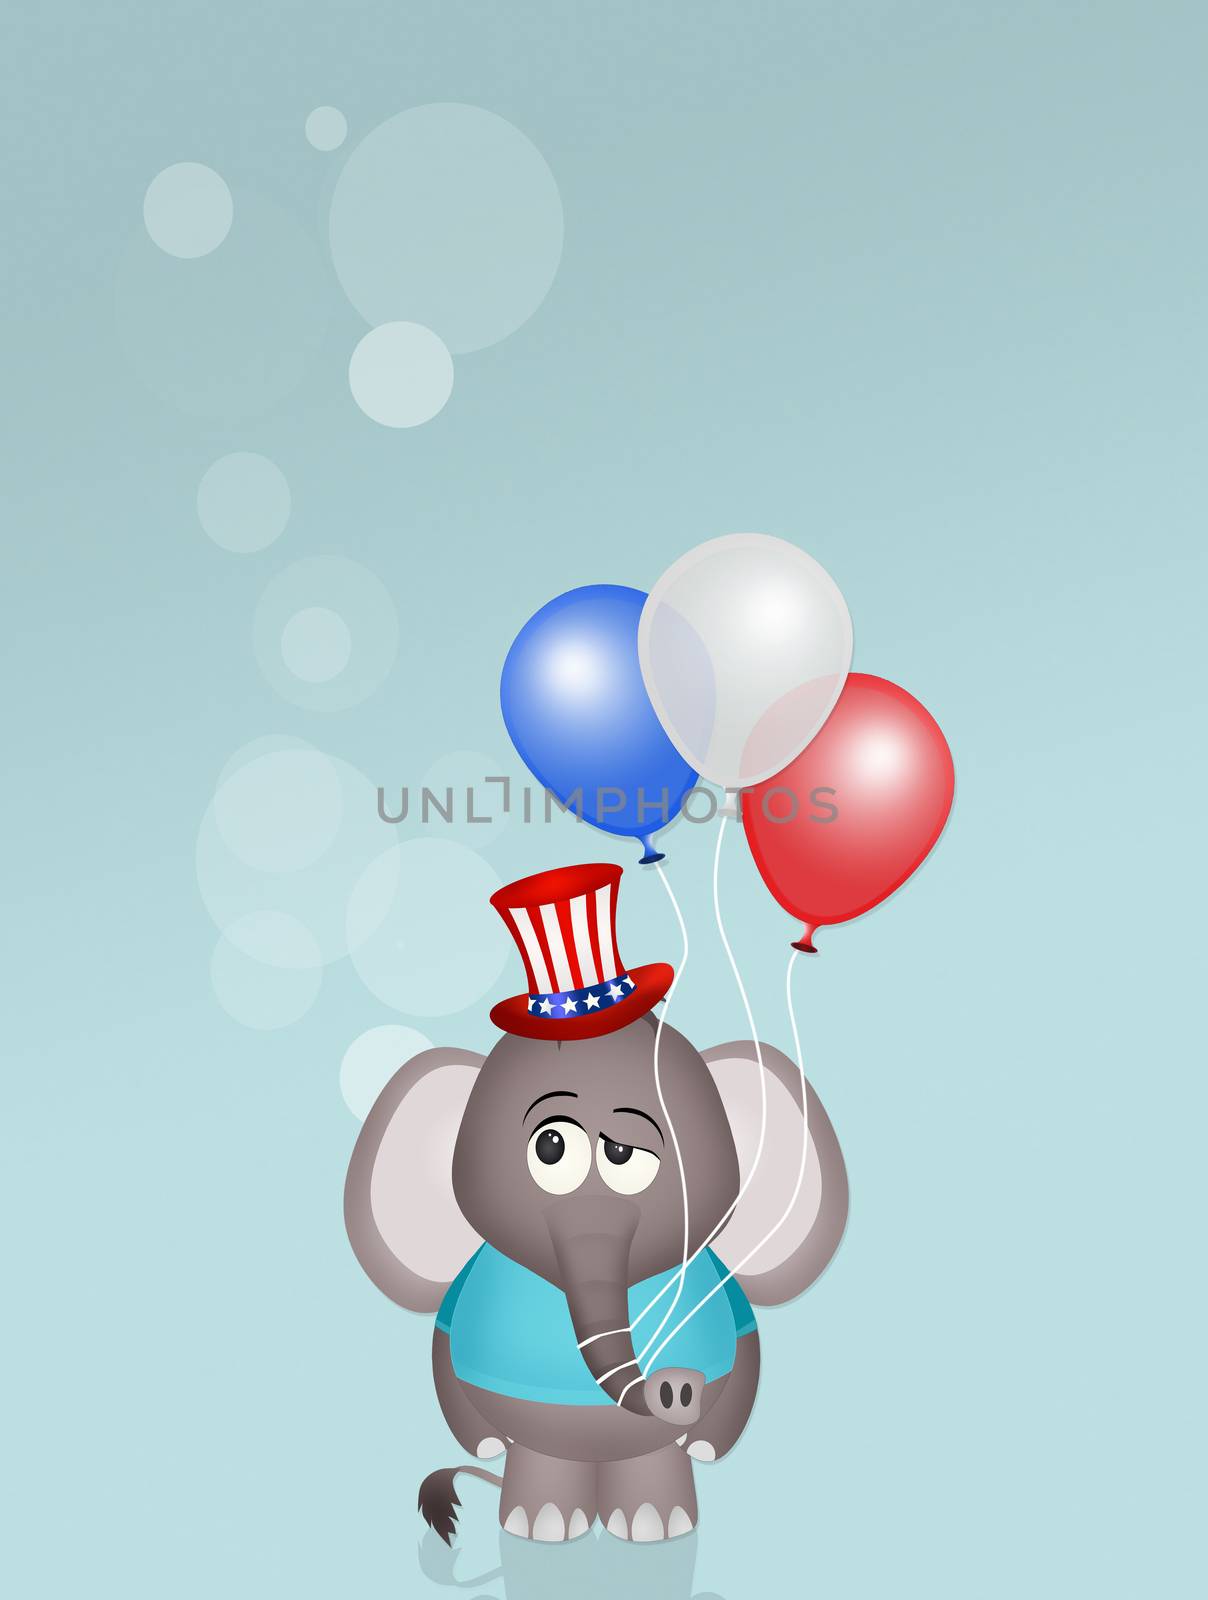 elephant with balloons for July 4th by adrenalina